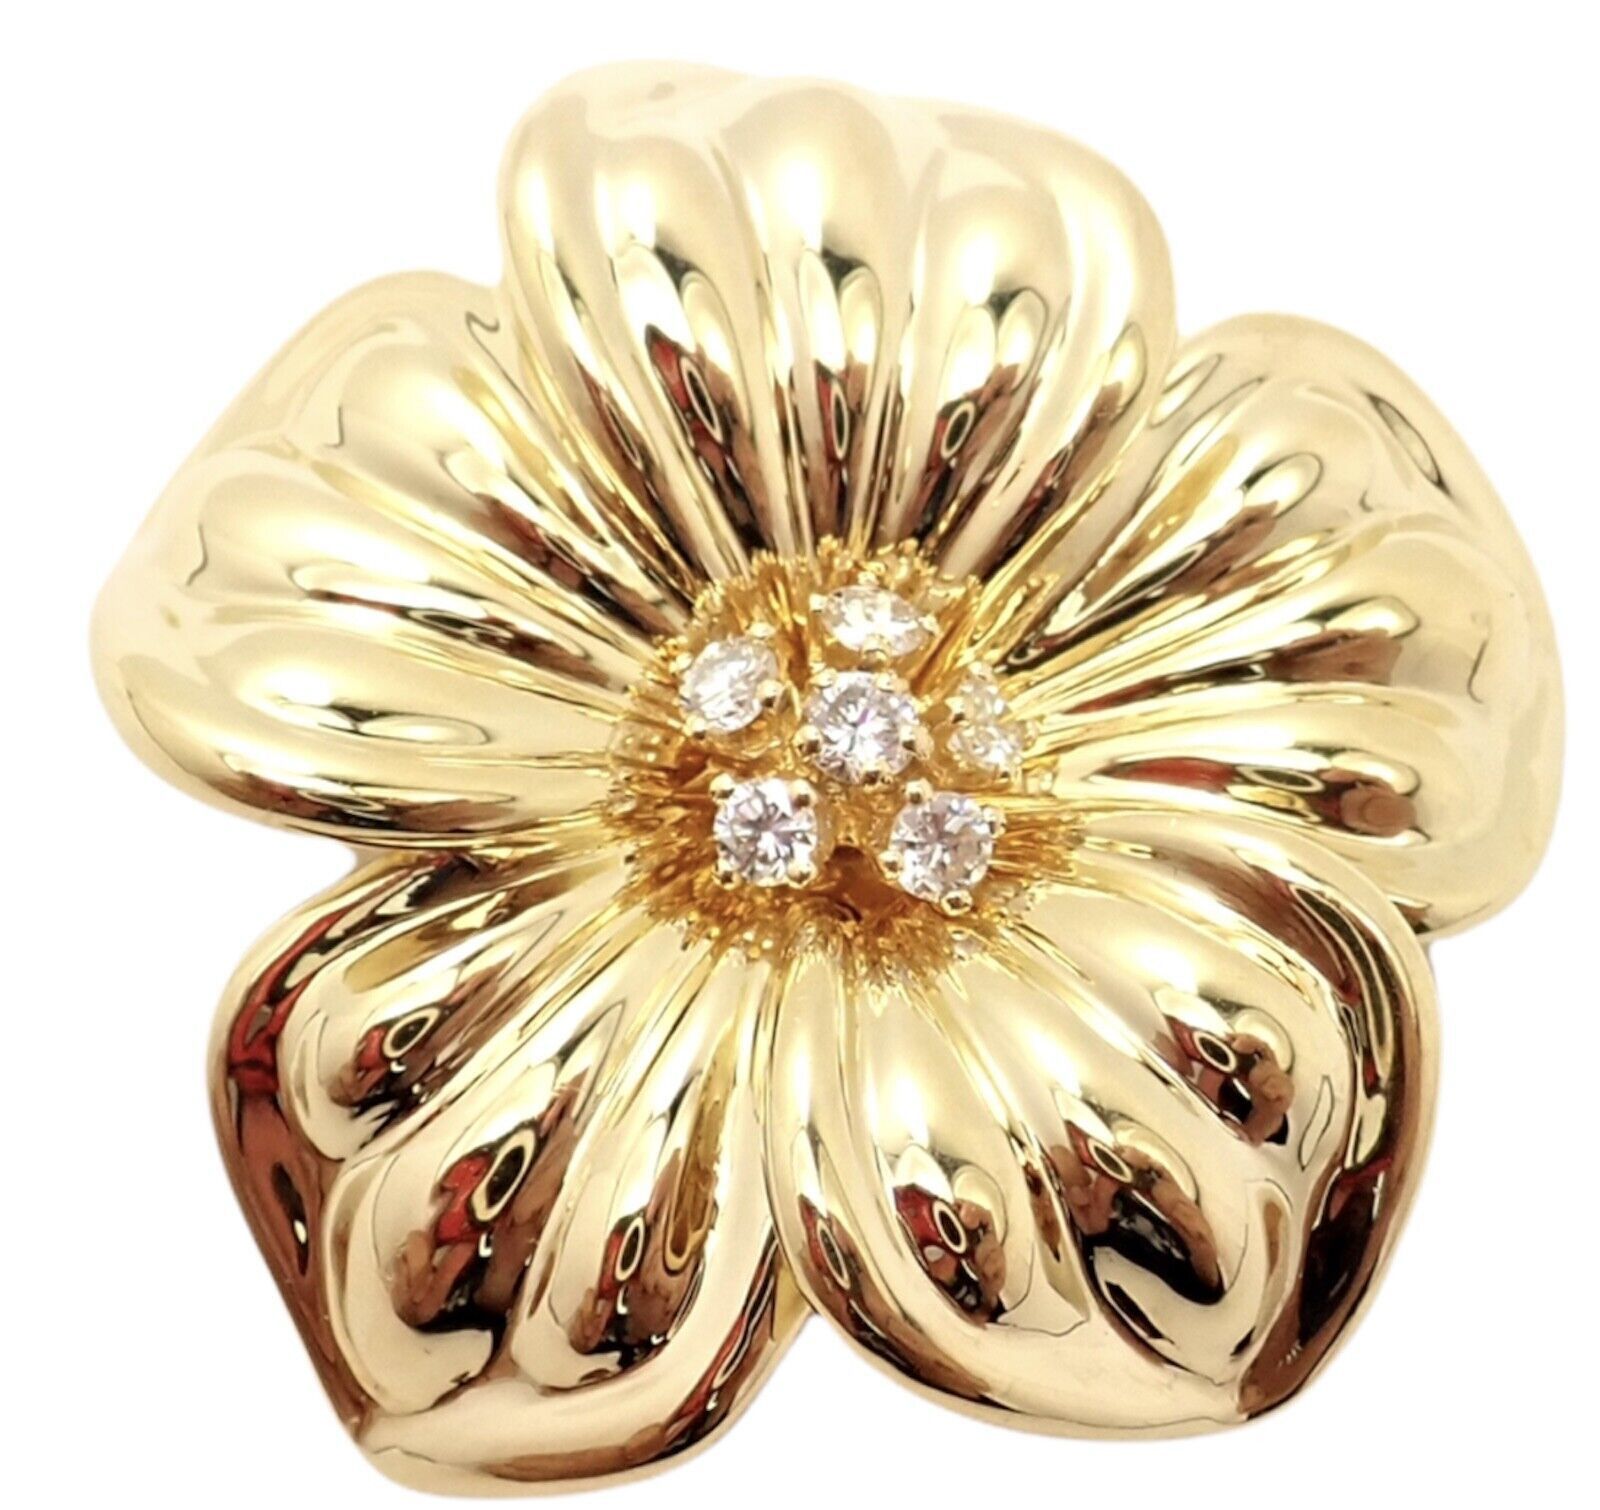 Van Cleef & Arpels Diamond 18k Yellow Gold Magnolia Flower Pin Brooch Size ONE SIZE - 1 Preview